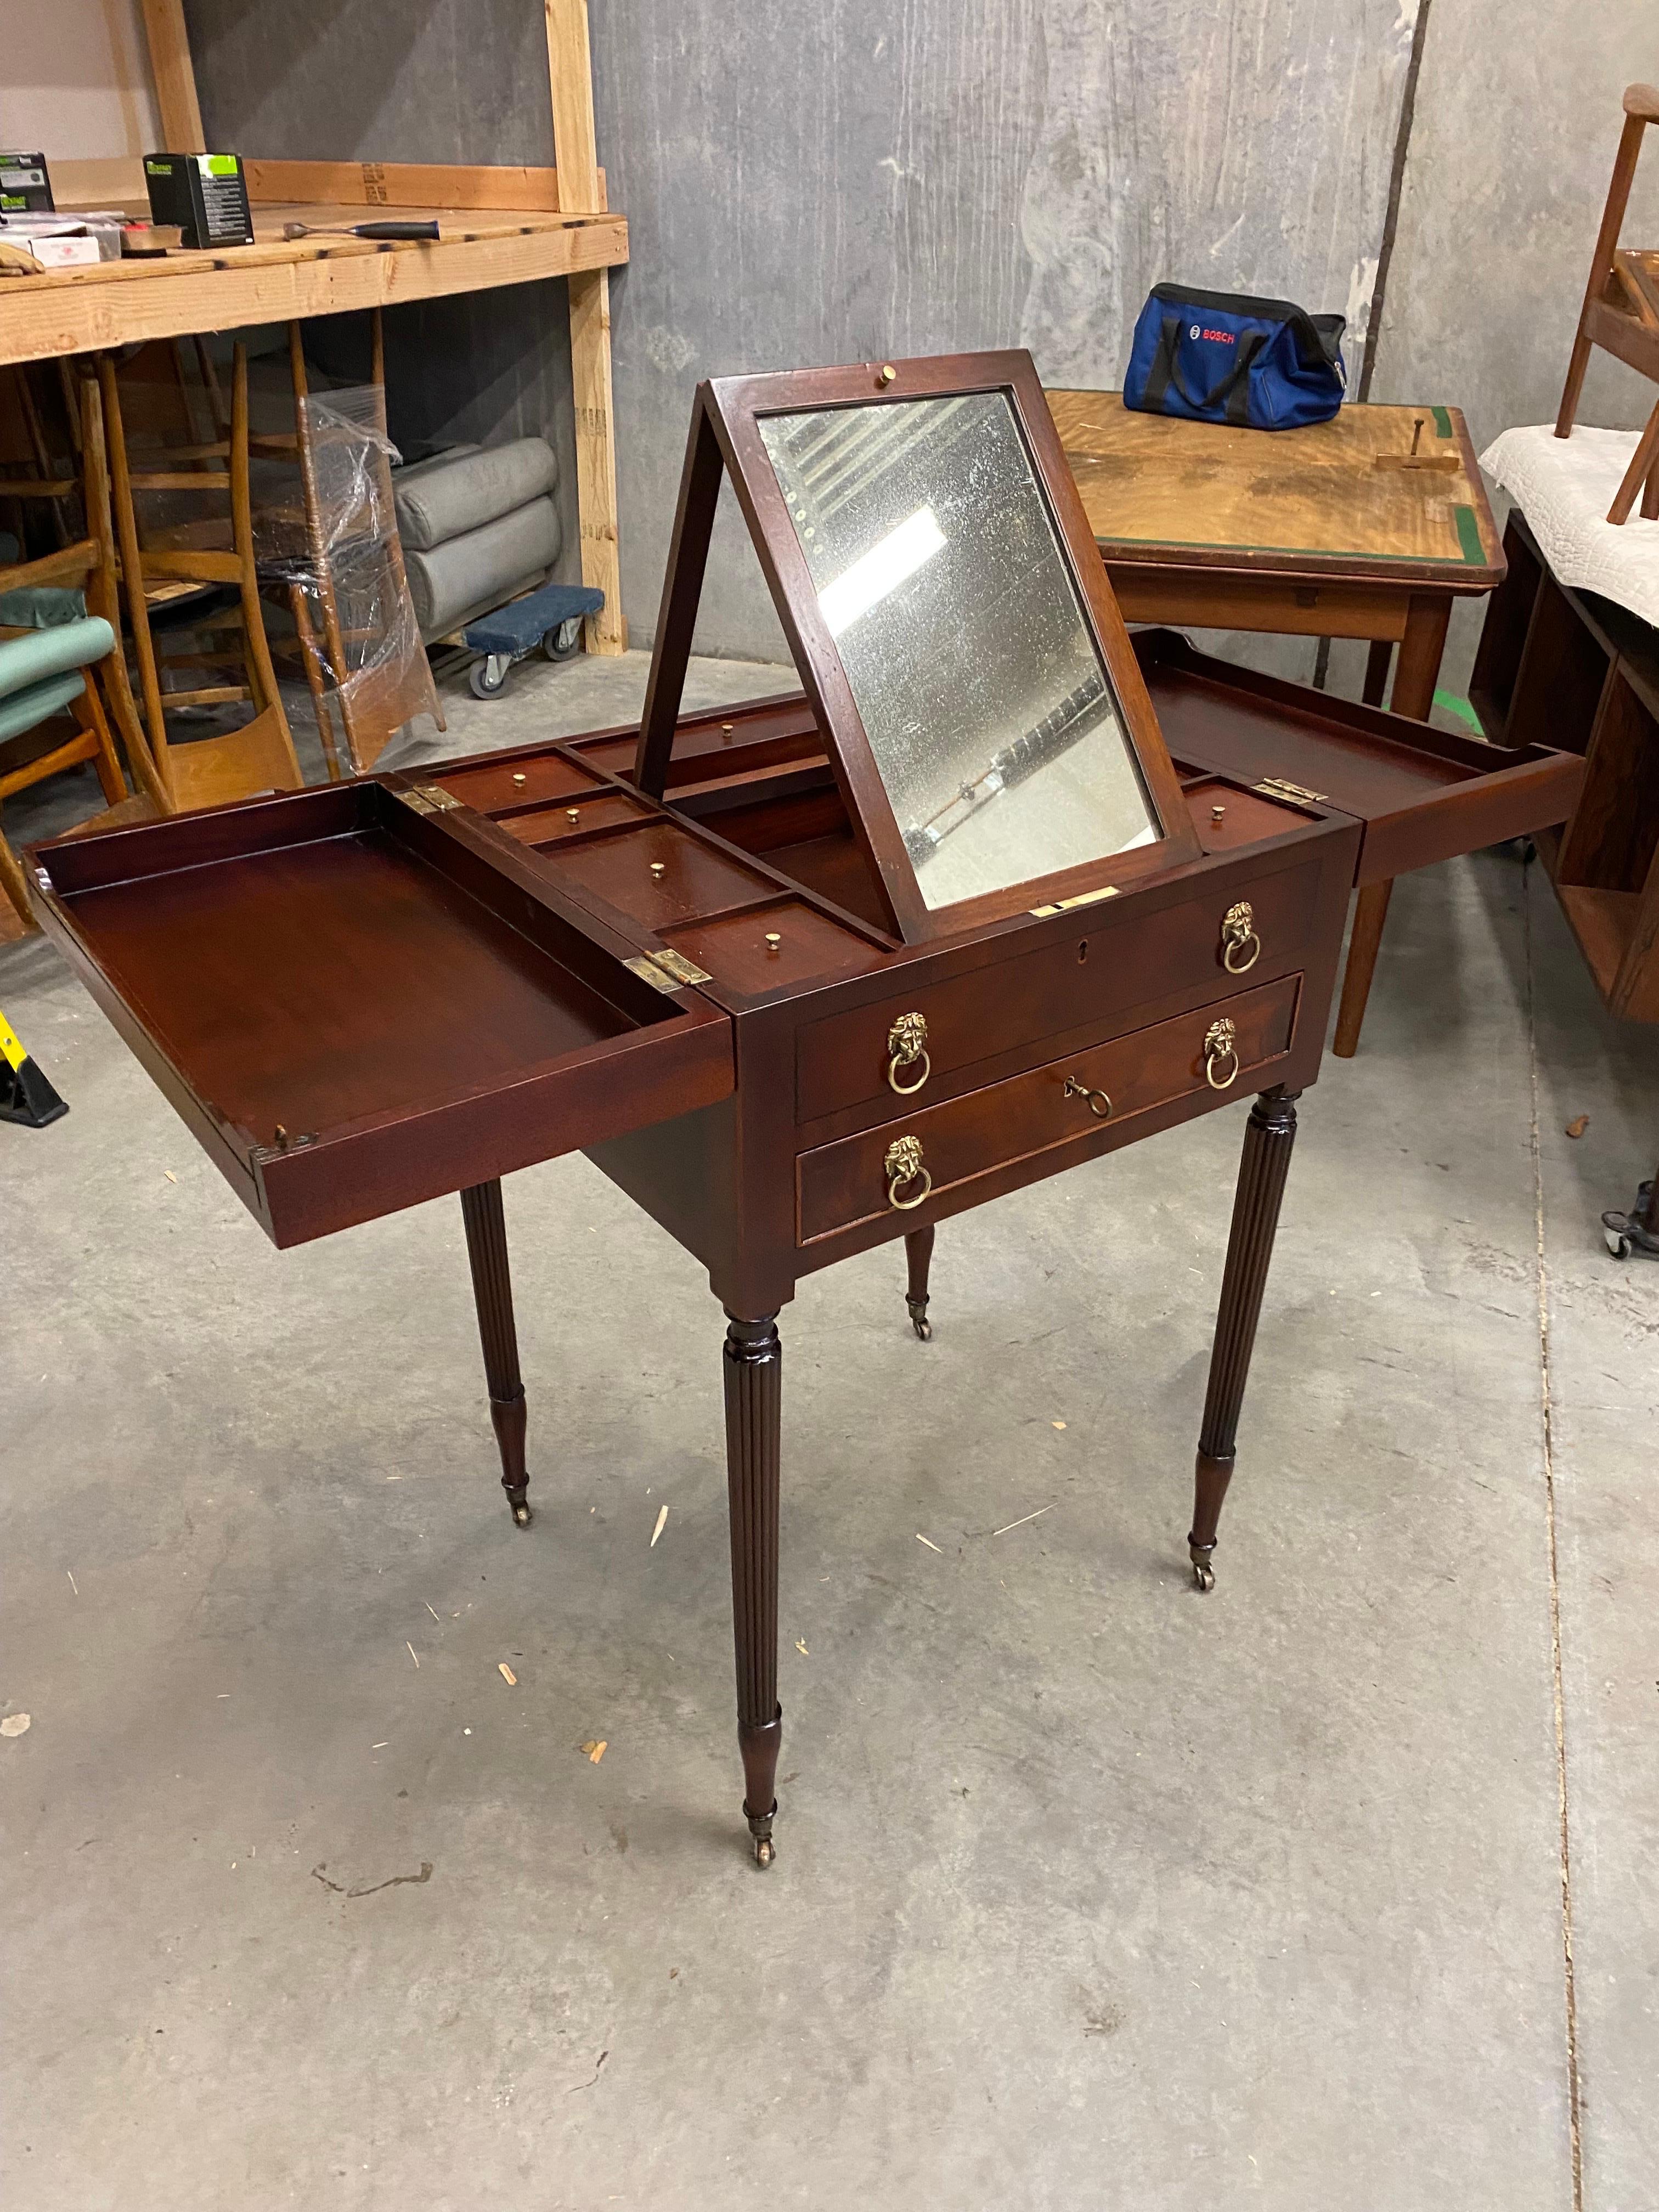 A Regency style carved mahogany Beau Brummel gentleman's dressing table, 20th century, the hinged top enclosing nine lidded compartments about a folding mirror, with one faux and one genuine drawer to the frieze below, the genuine drawer fitted with